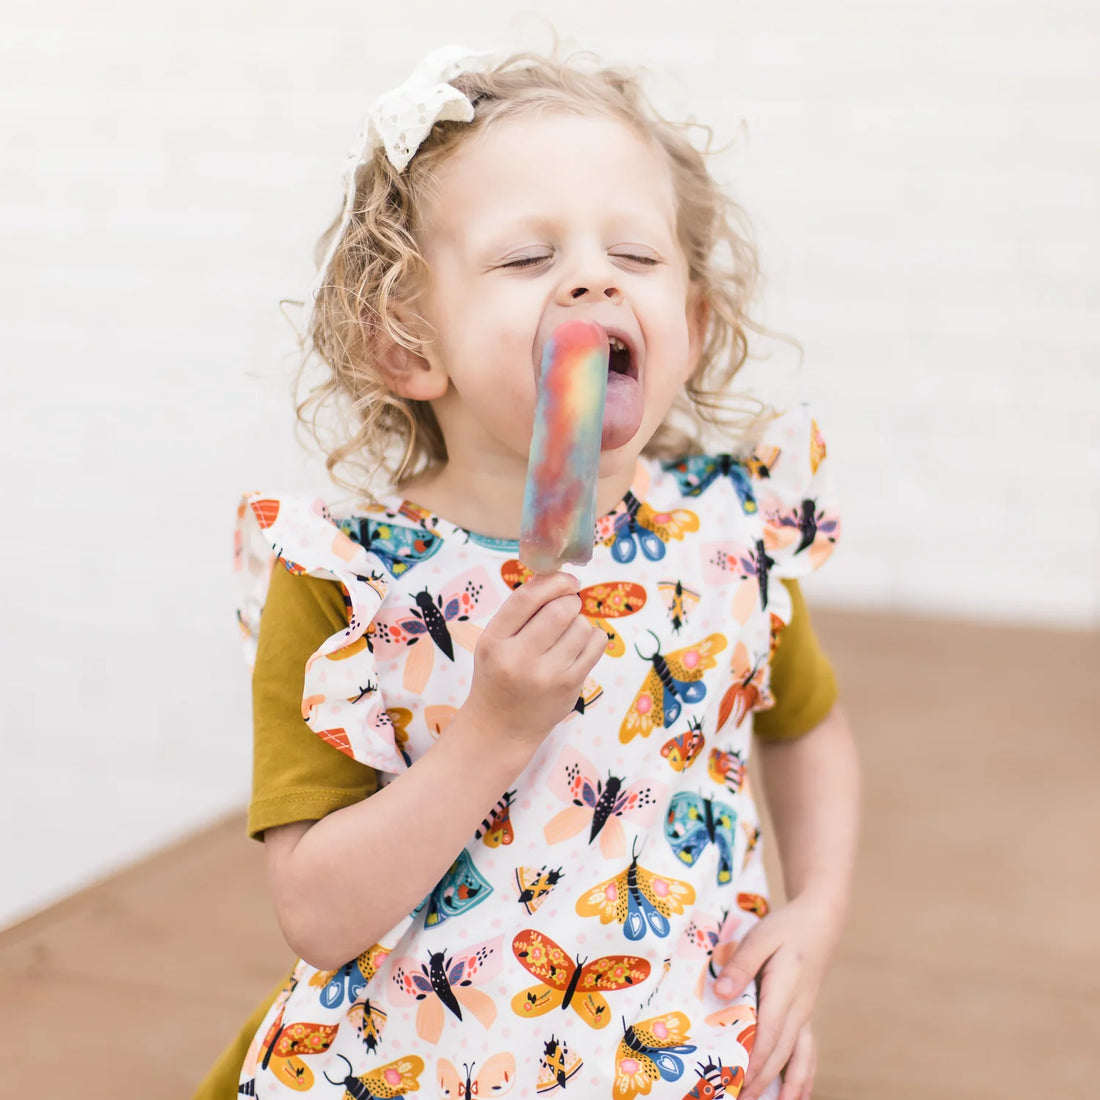 Child eating a popsicle wearing a cutie bapron